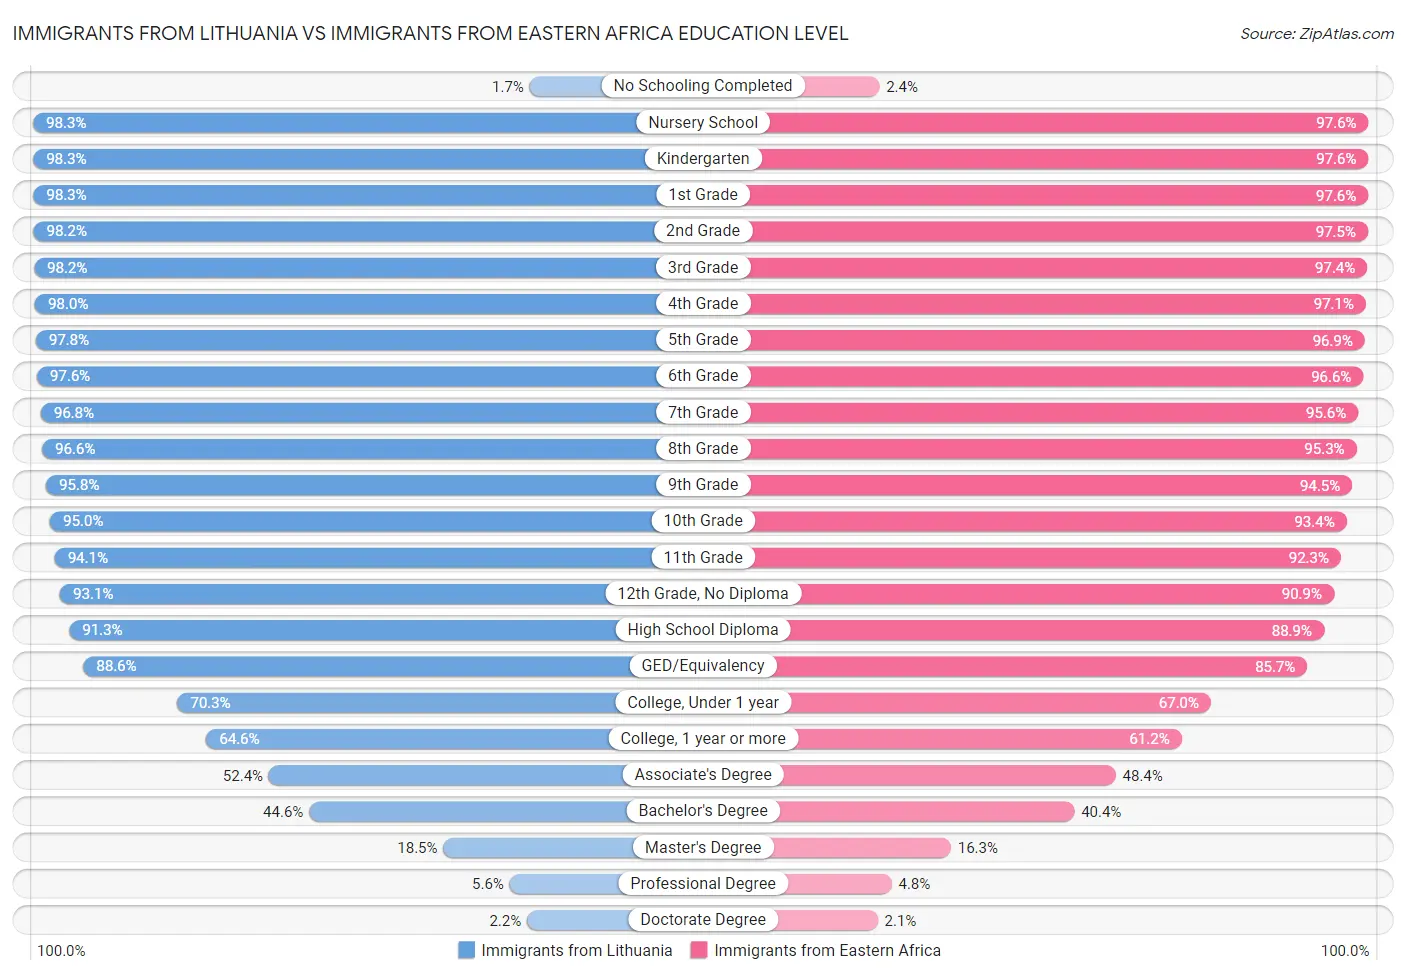 Immigrants from Lithuania vs Immigrants from Eastern Africa Education Level